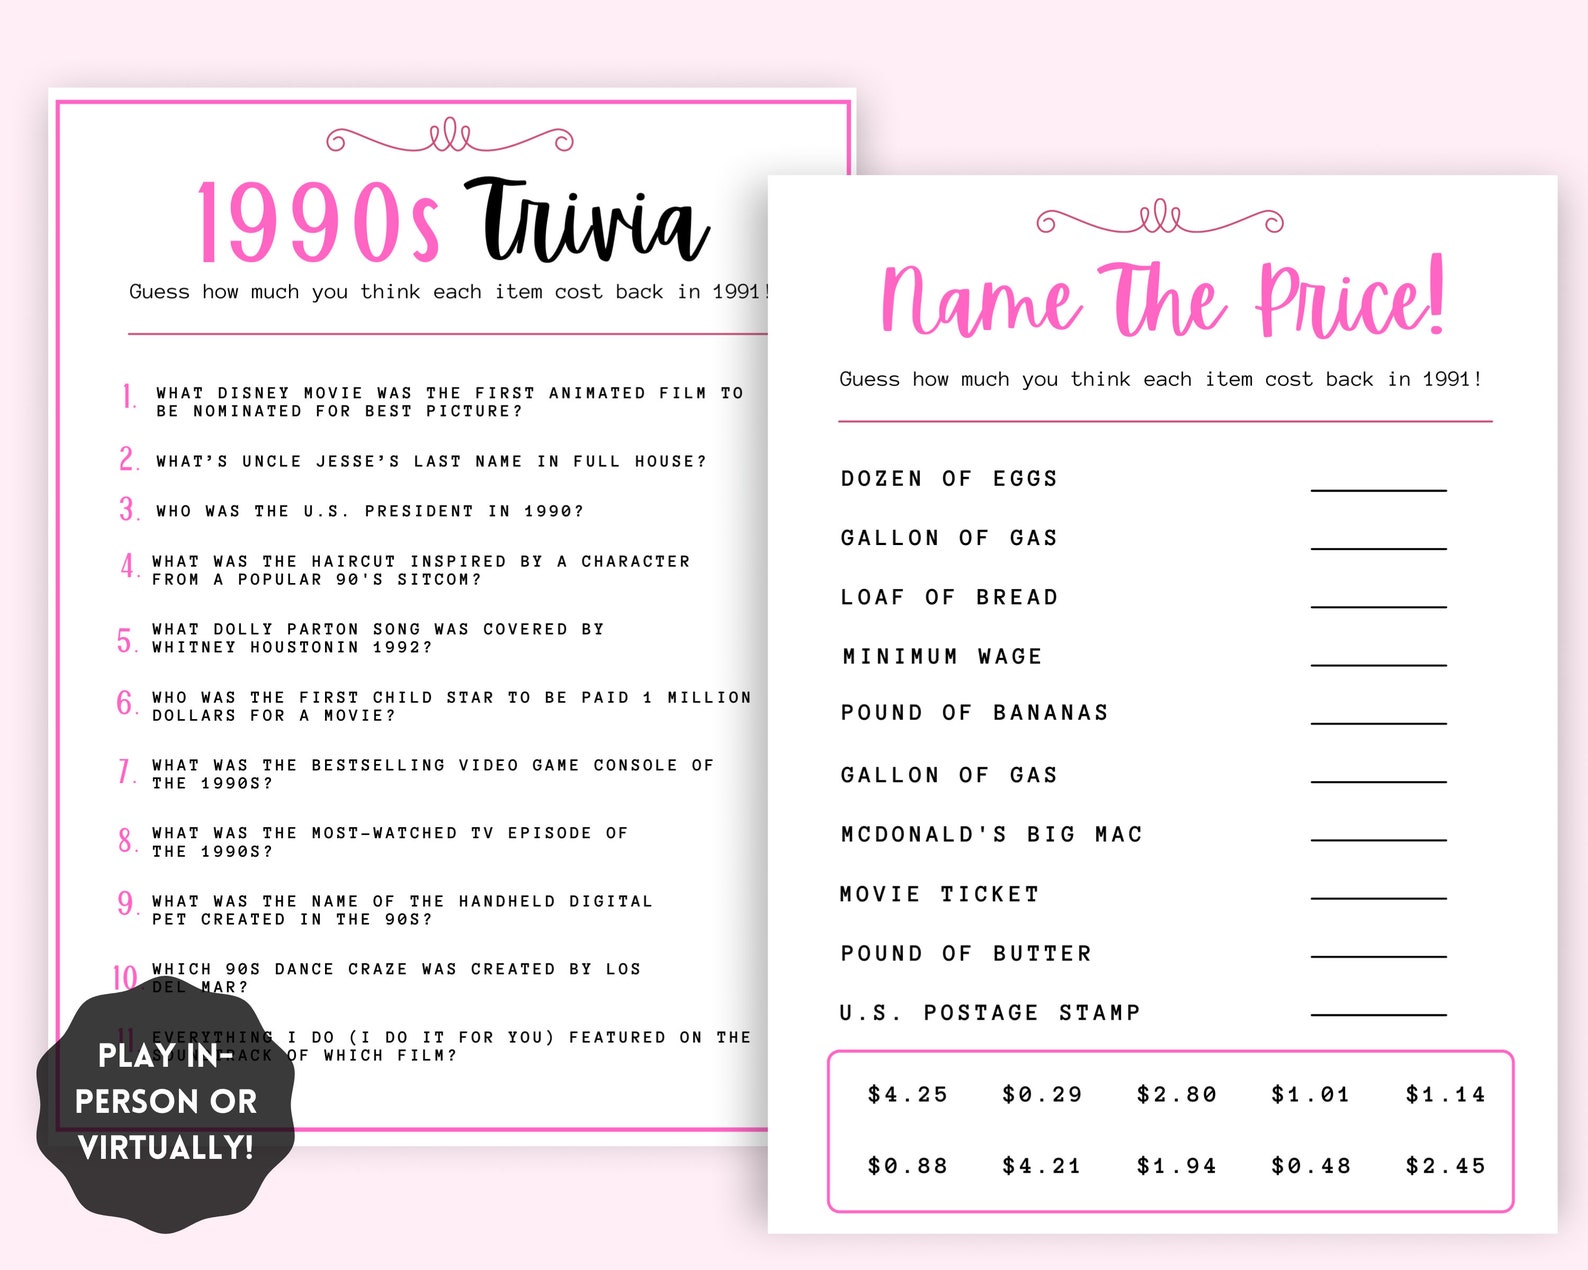 90s-party-games-bundle-90s-birthday-party-games-90s-themed-etsy